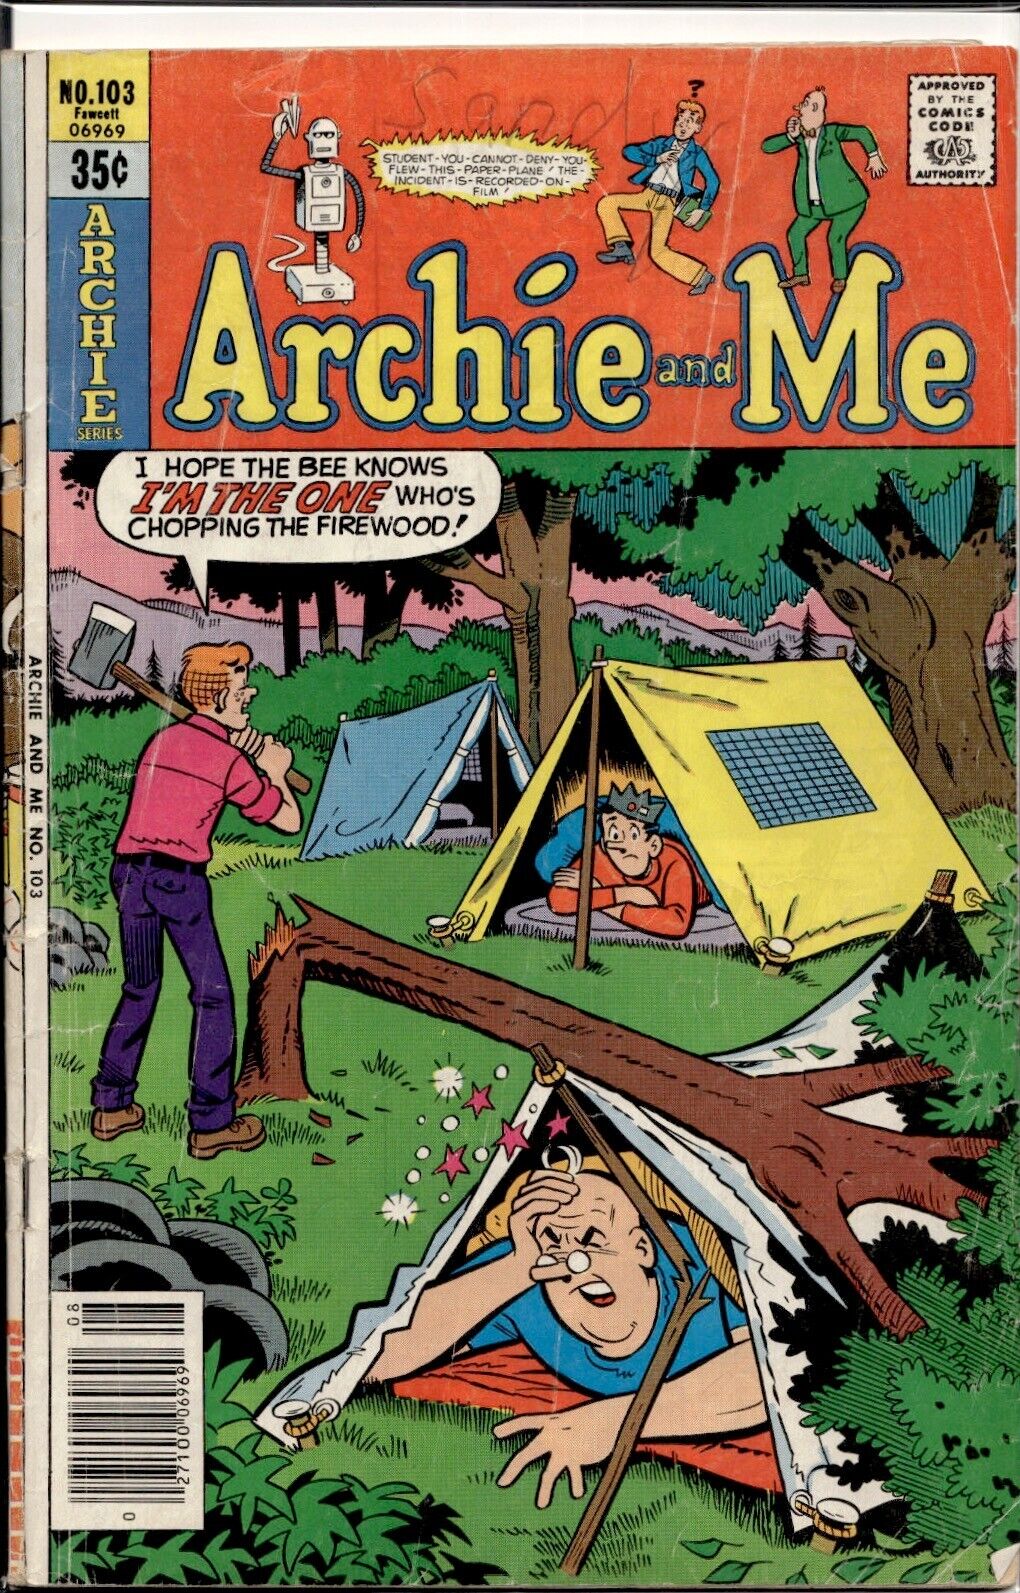 Archie and Me #103 in Good Reader condition. Archie comics